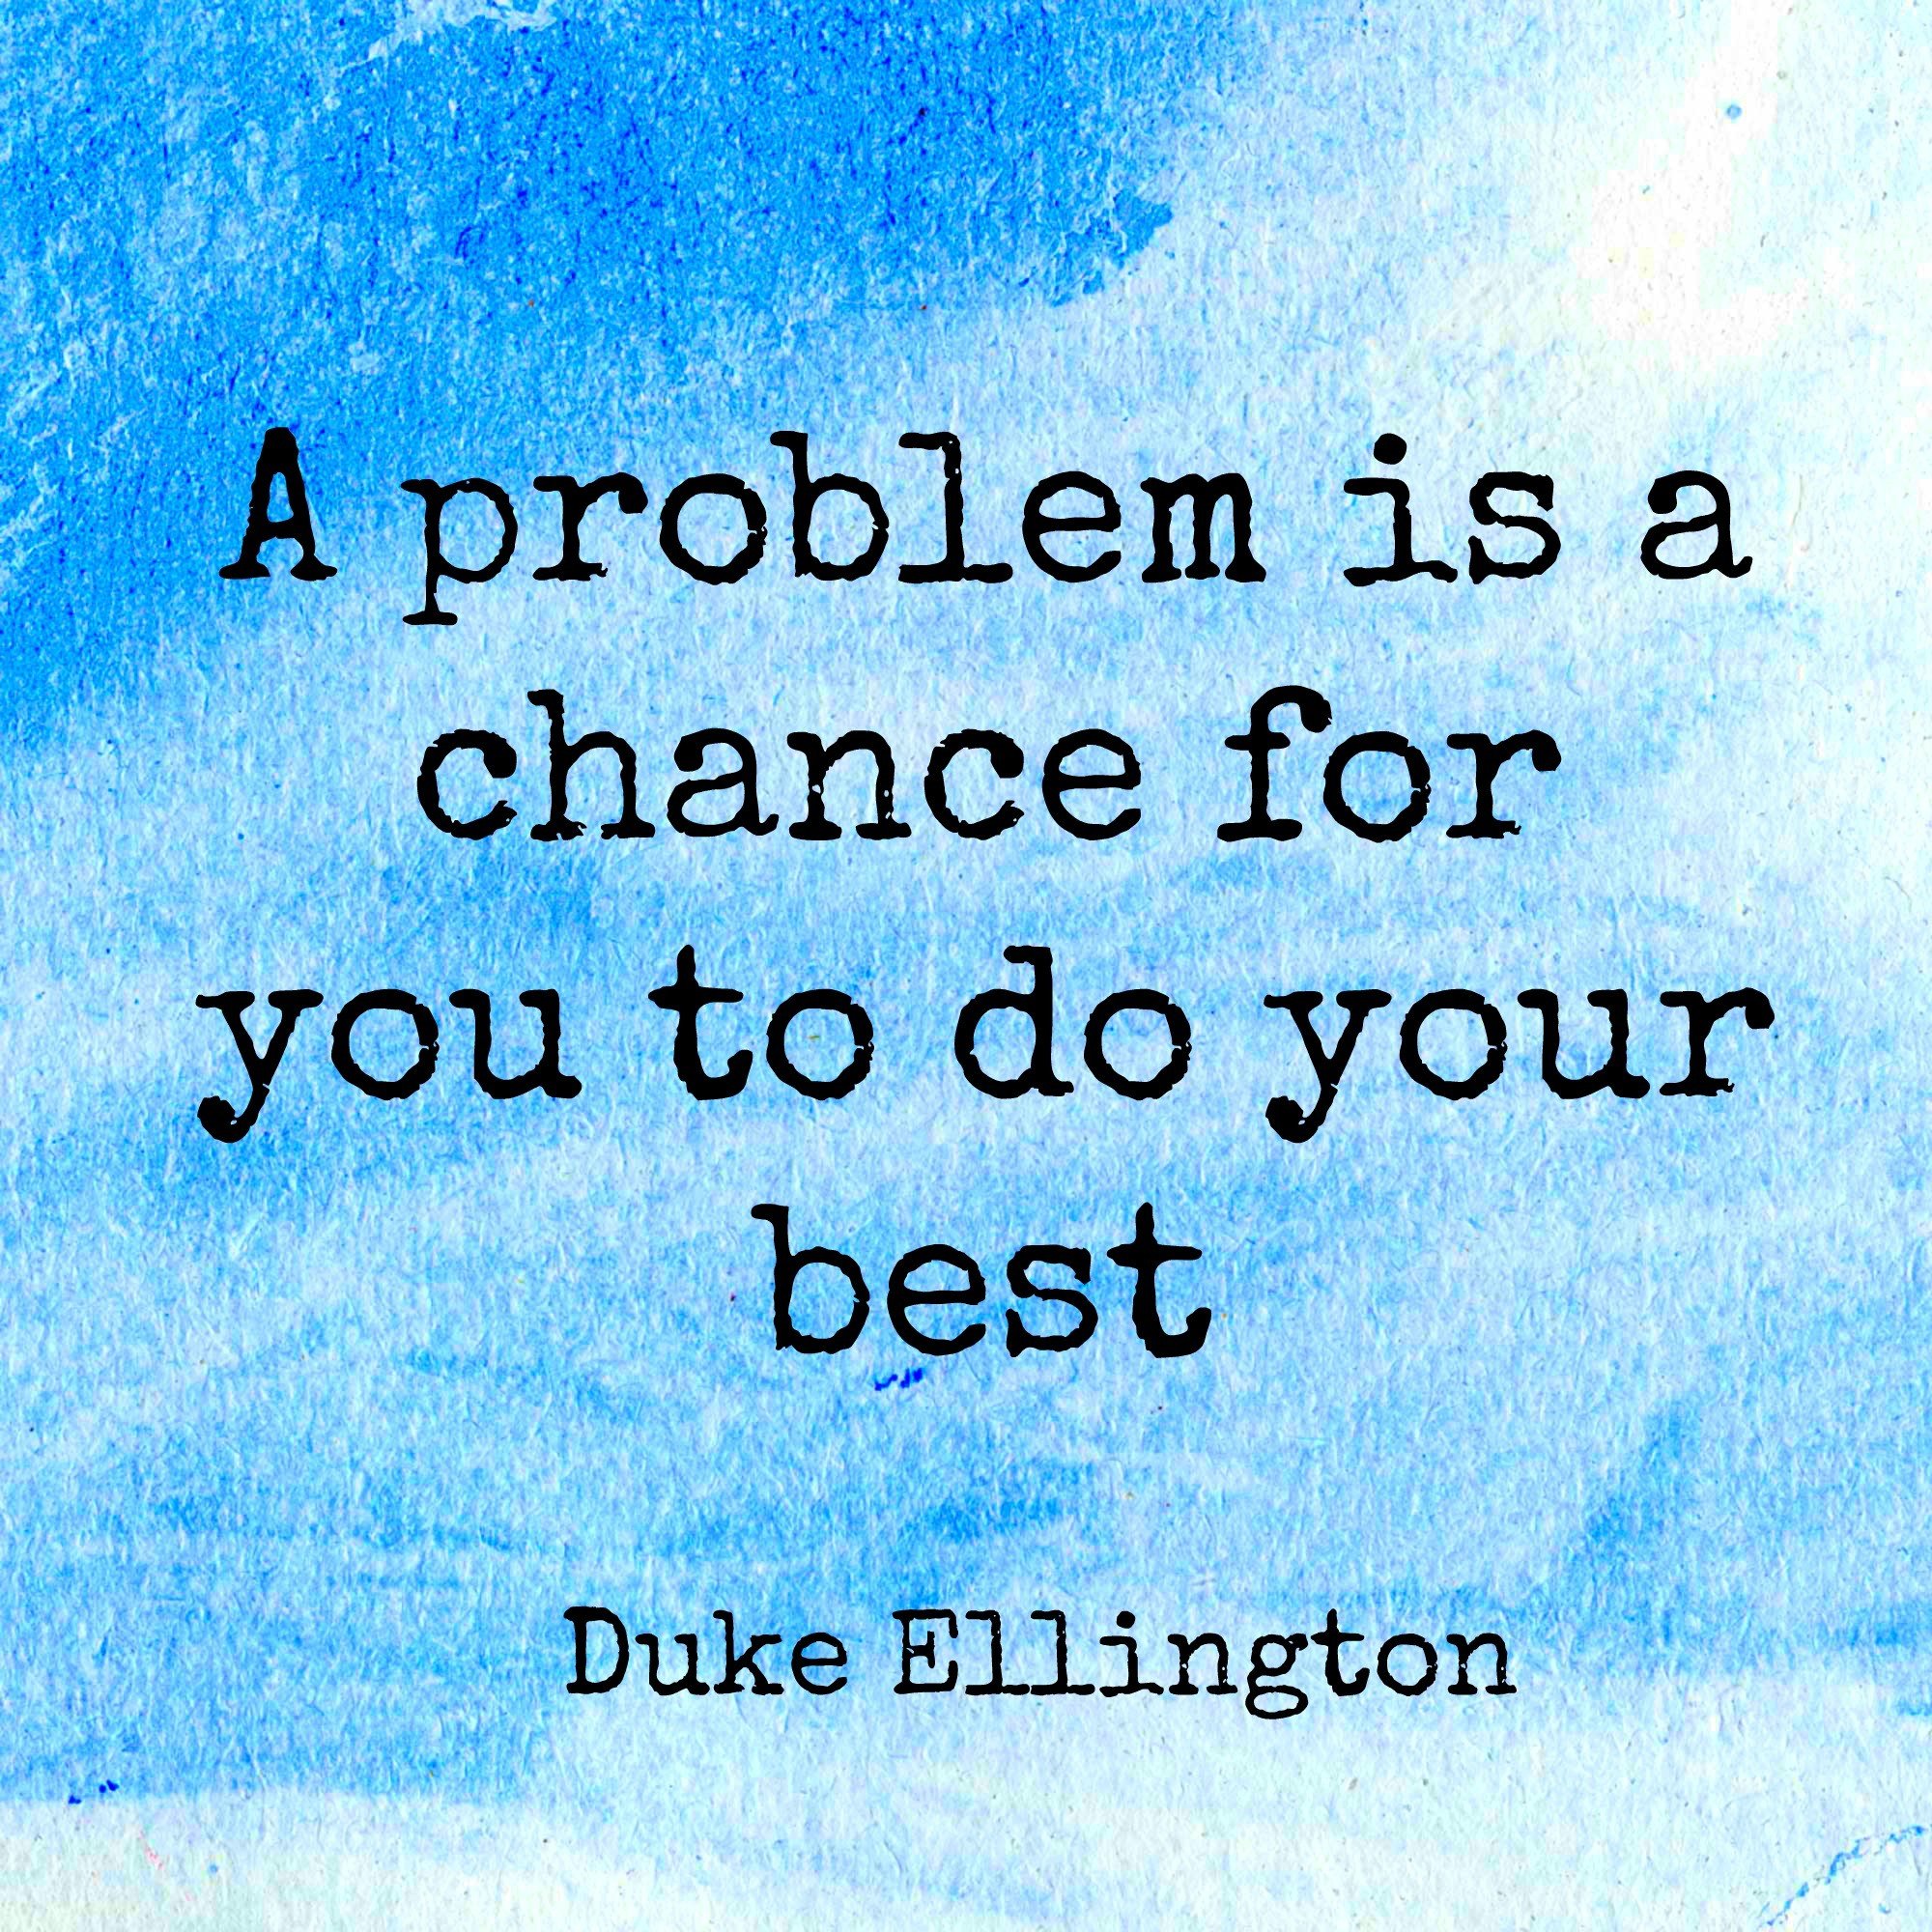 A problem is your chance to do your best.